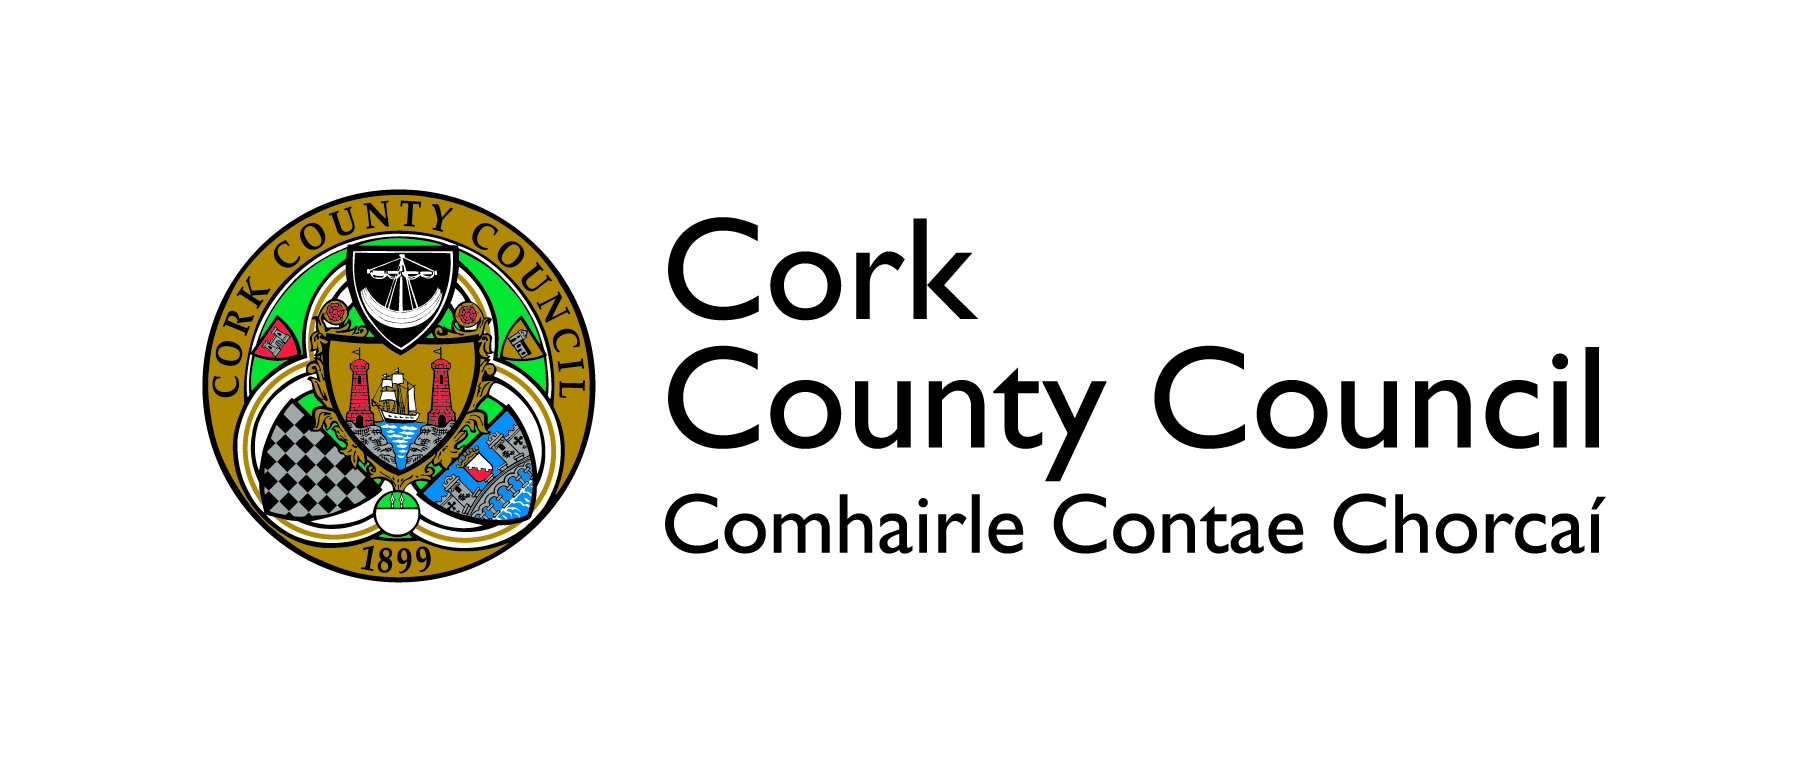 Cork County Council’s Service Arrangements for Level 3 of Ireland’s Plan for Living with Covid 19